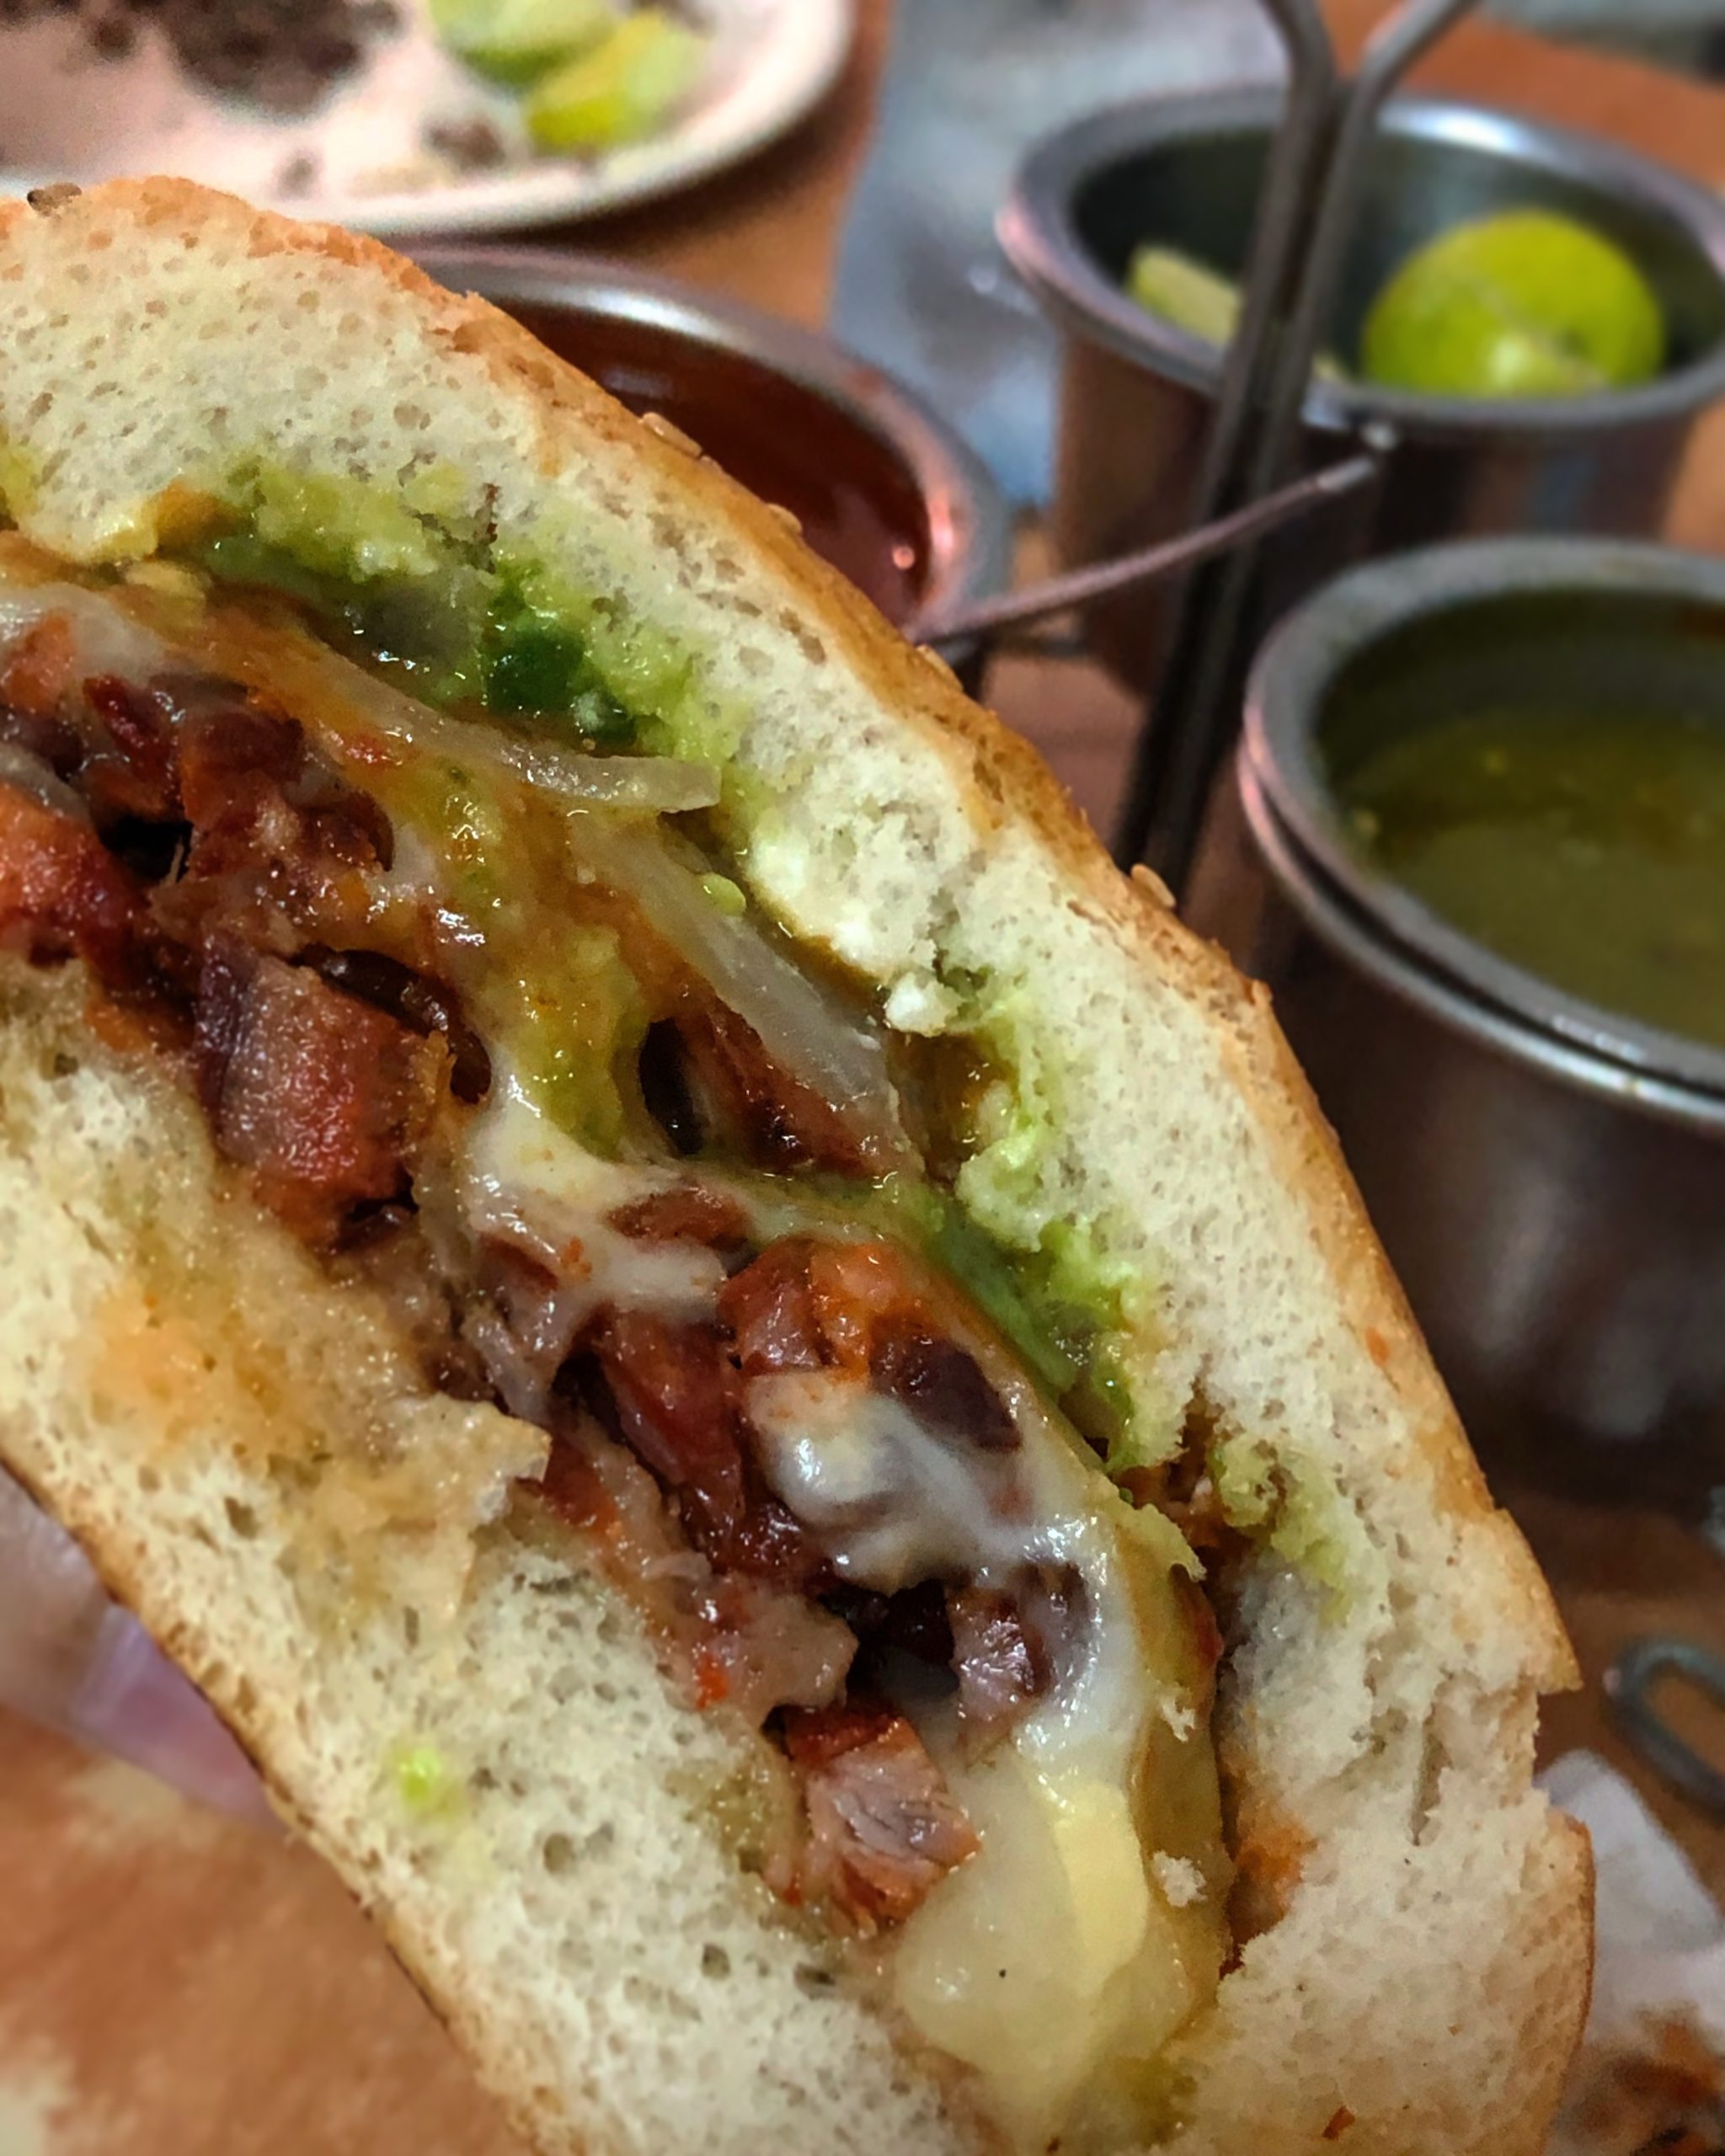 Torta of al pastor with cheese and guacamole